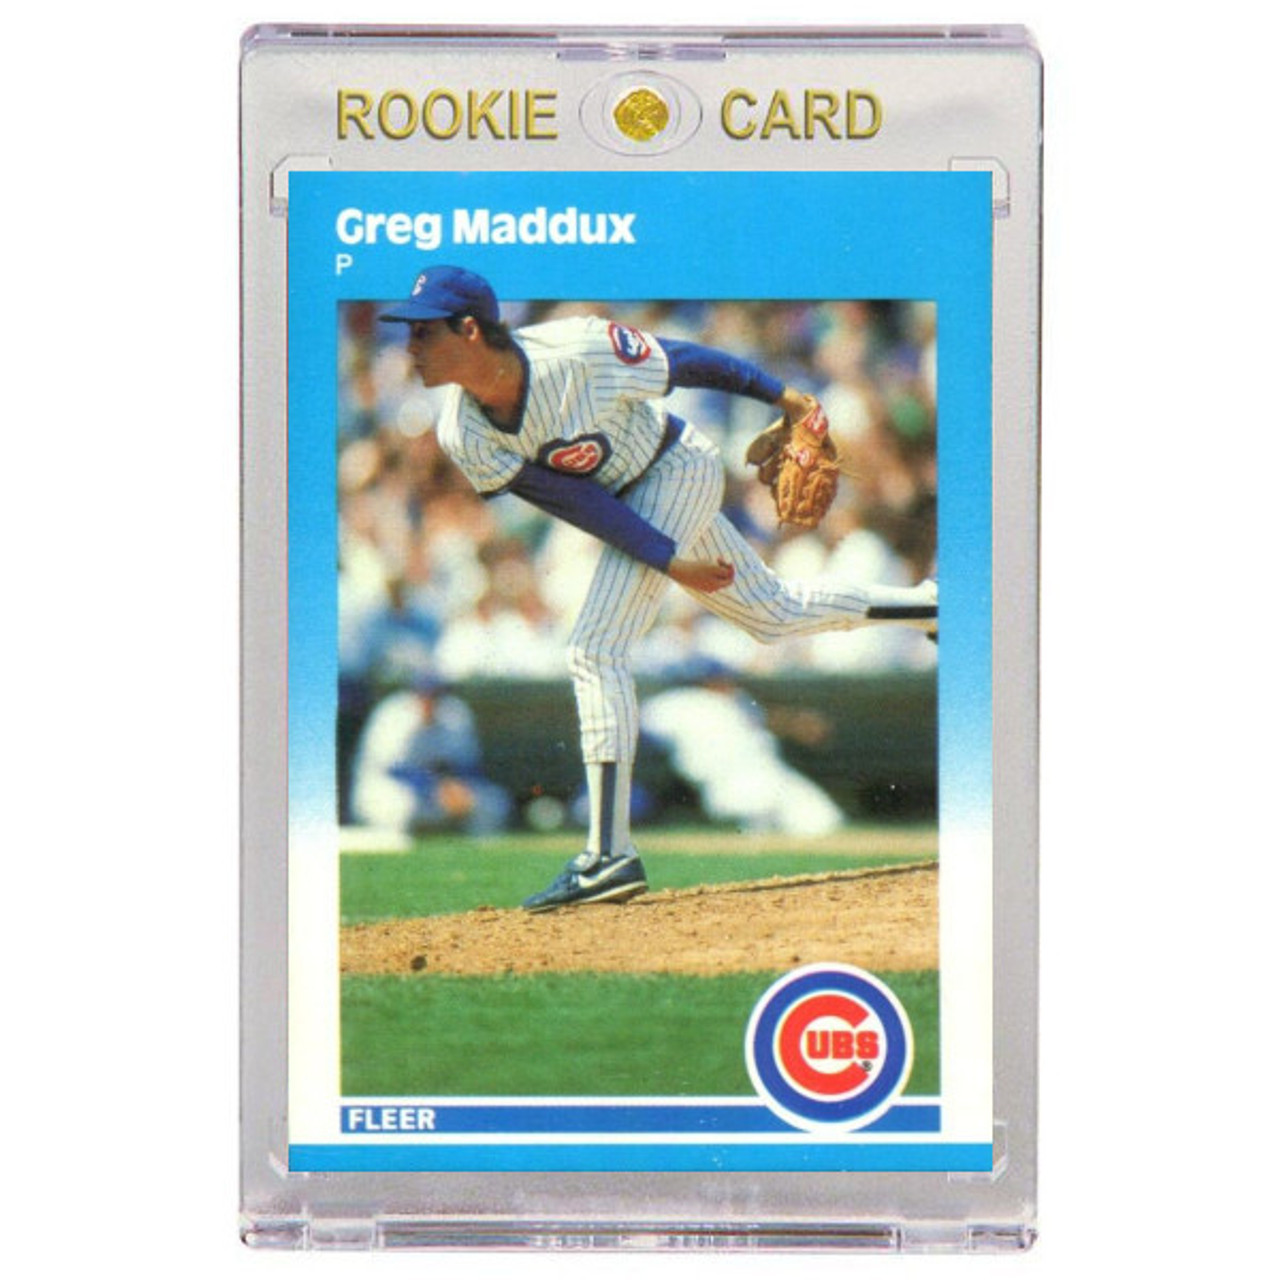 GREG MADDUX 8X10 PHOTO CHICAGO CUBS BASEBALL PICTURE MLB GOLD GLOVE